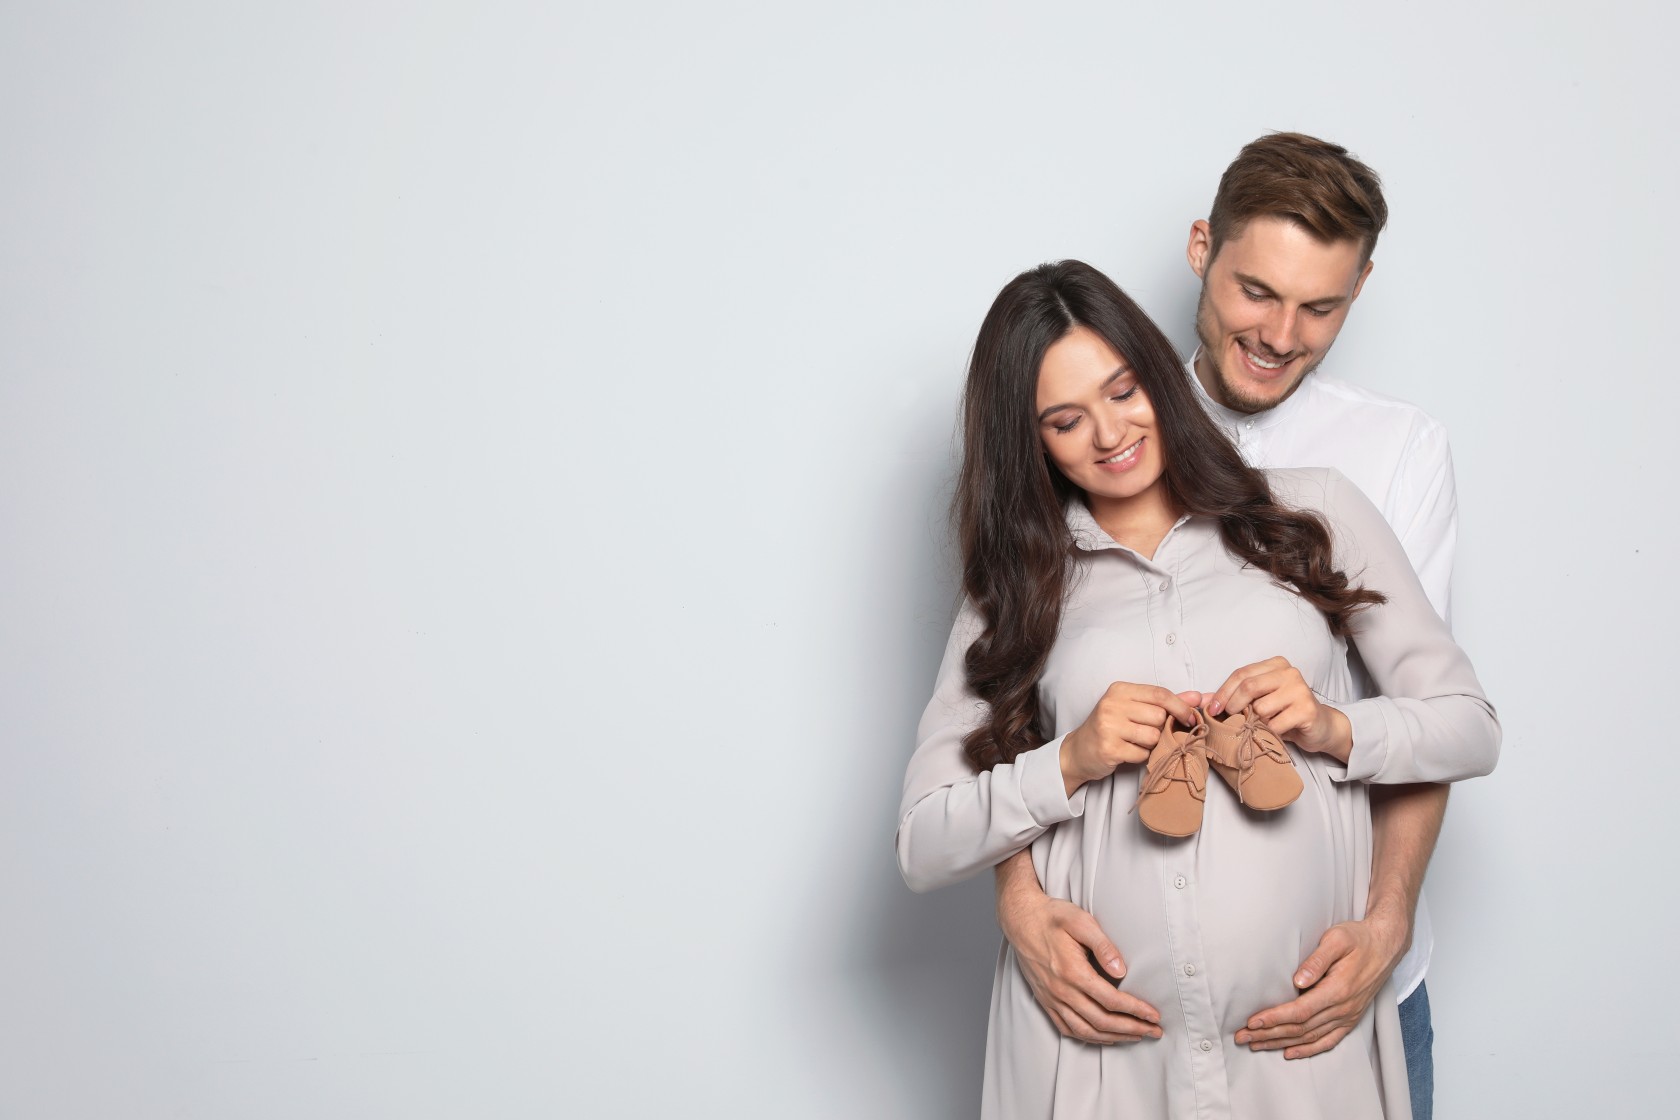 What are the possibilities of conceiving naturally after IVF?